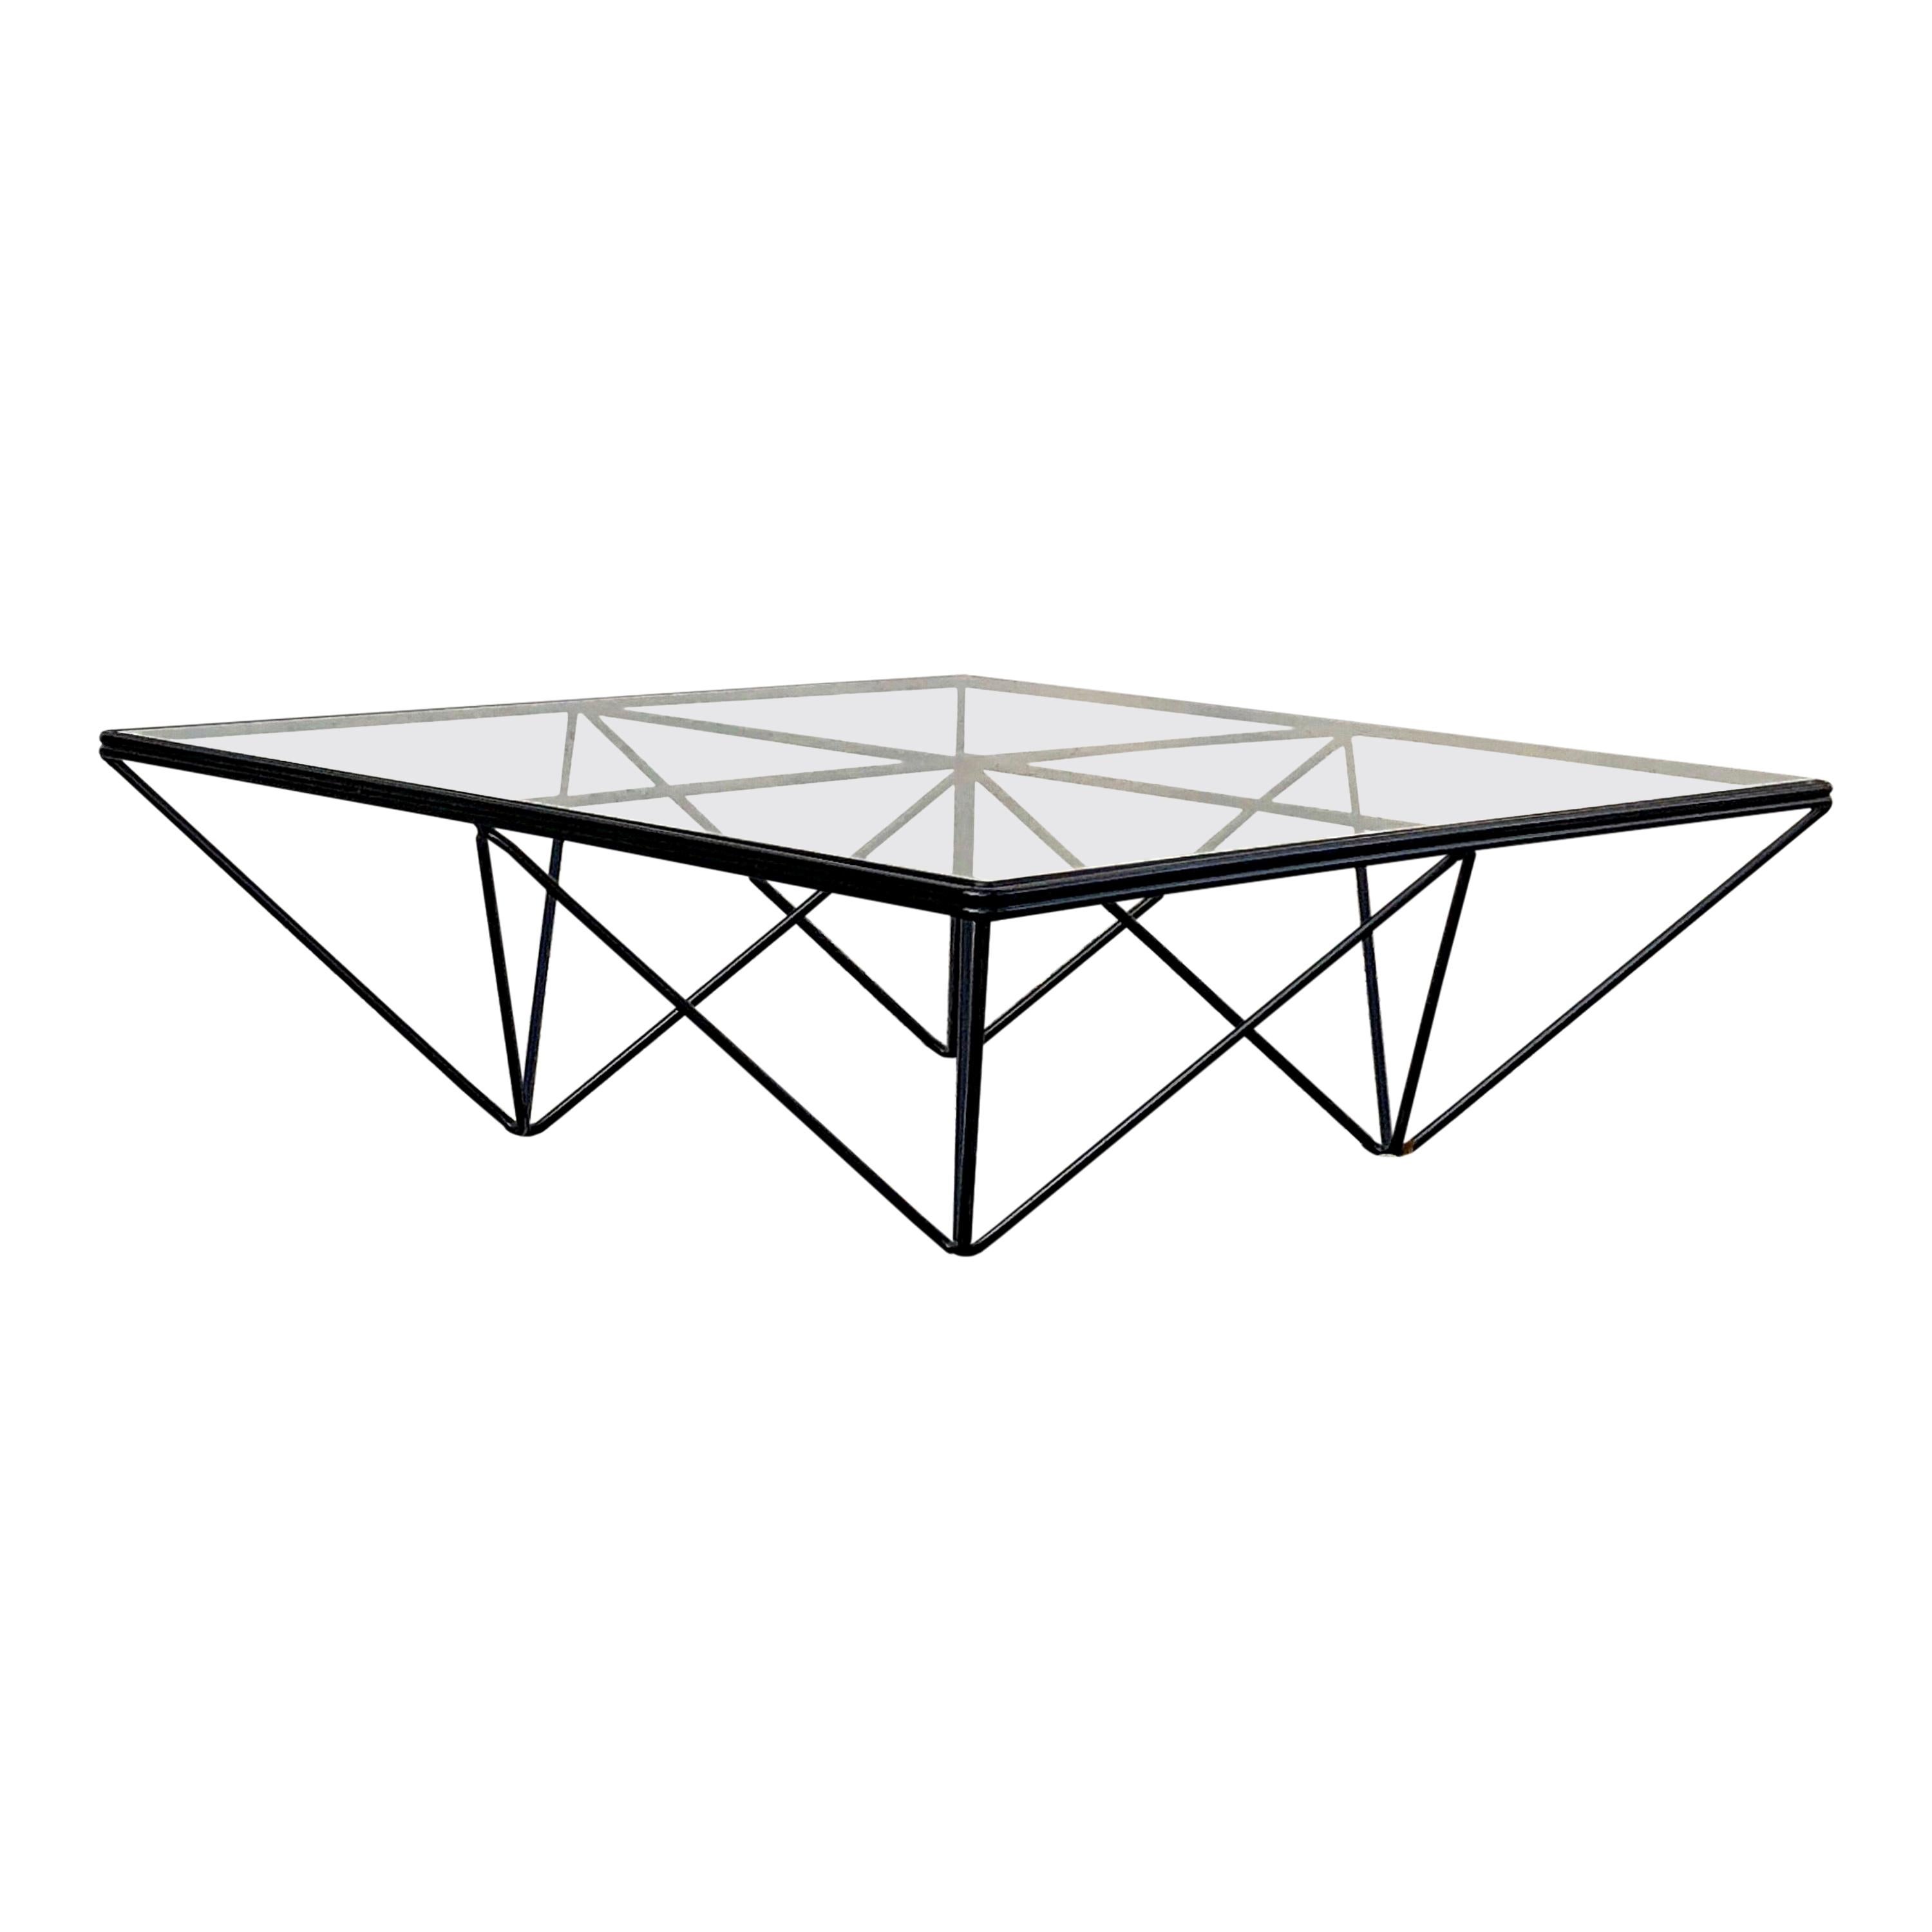 Square Glass and Iron "Alanda" Coffee Table in the style of Paolo Piva, 1981 For Sale